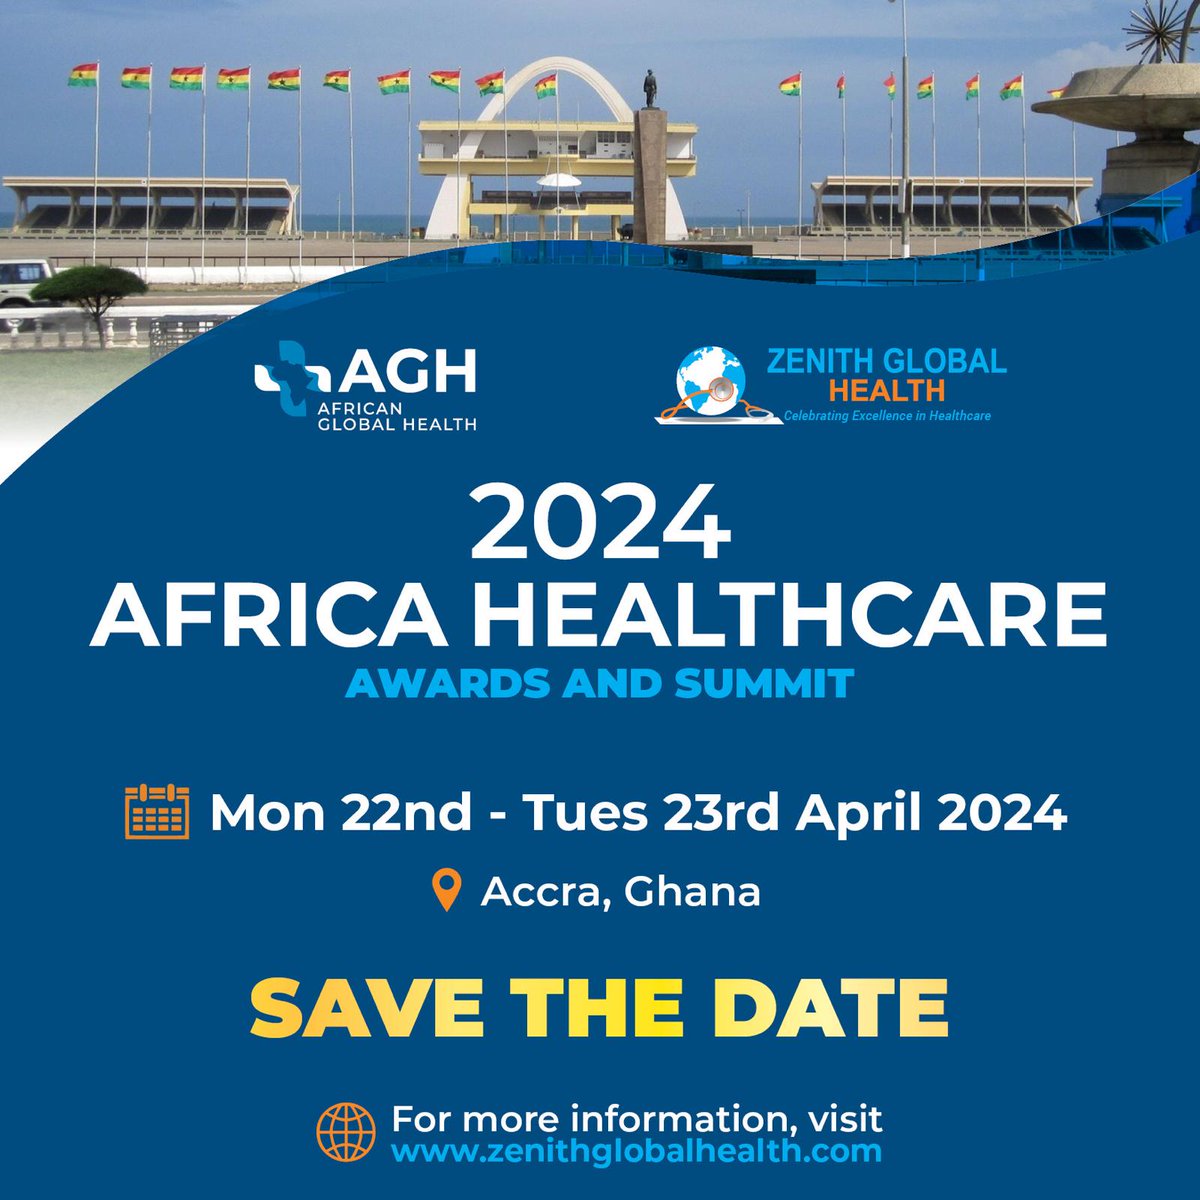 It is happening!👏🎊And we are excited to share that the 2024 Africa Healthcare Awards and Summit will take place in Accra #Ghana Save the date 📅 and watch the space #AHAS2024 #Populationhealth #ClimateAction @CleanAirFund @iamrobotboy @Joy997FM  @healthiconaward @AGlobalHealth